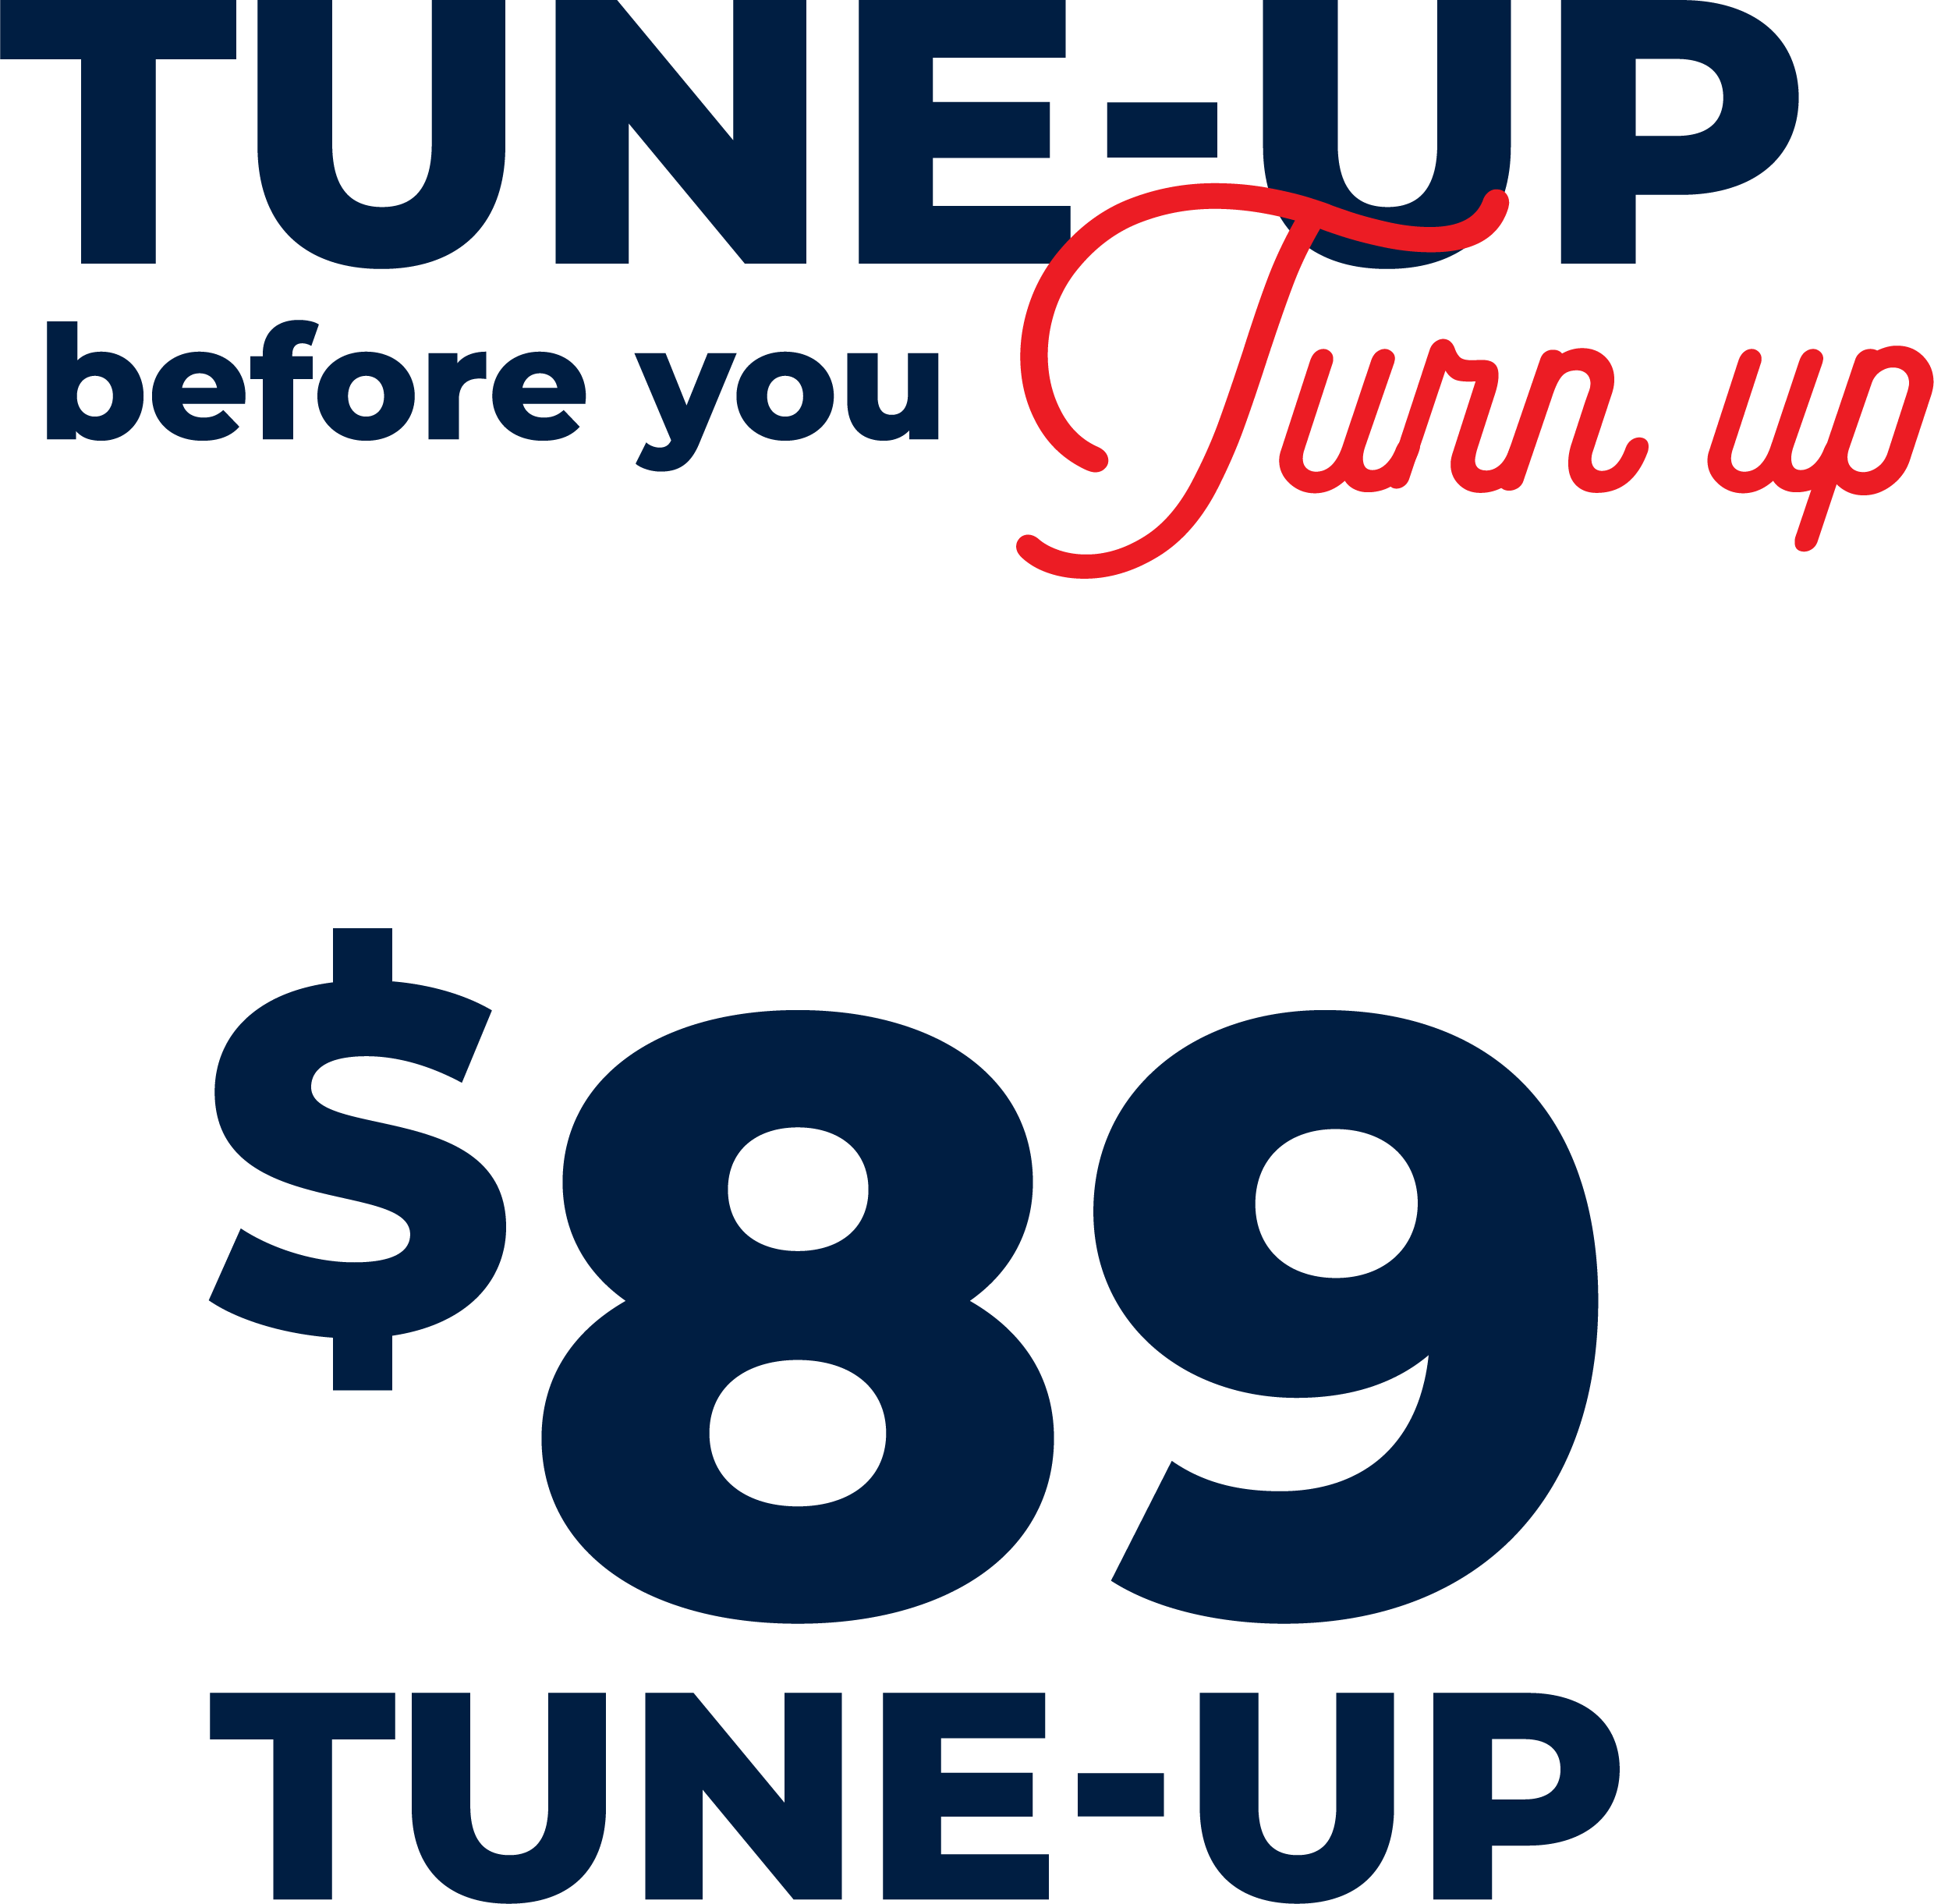 Tune-up before you turn up with an $89 tune-up!